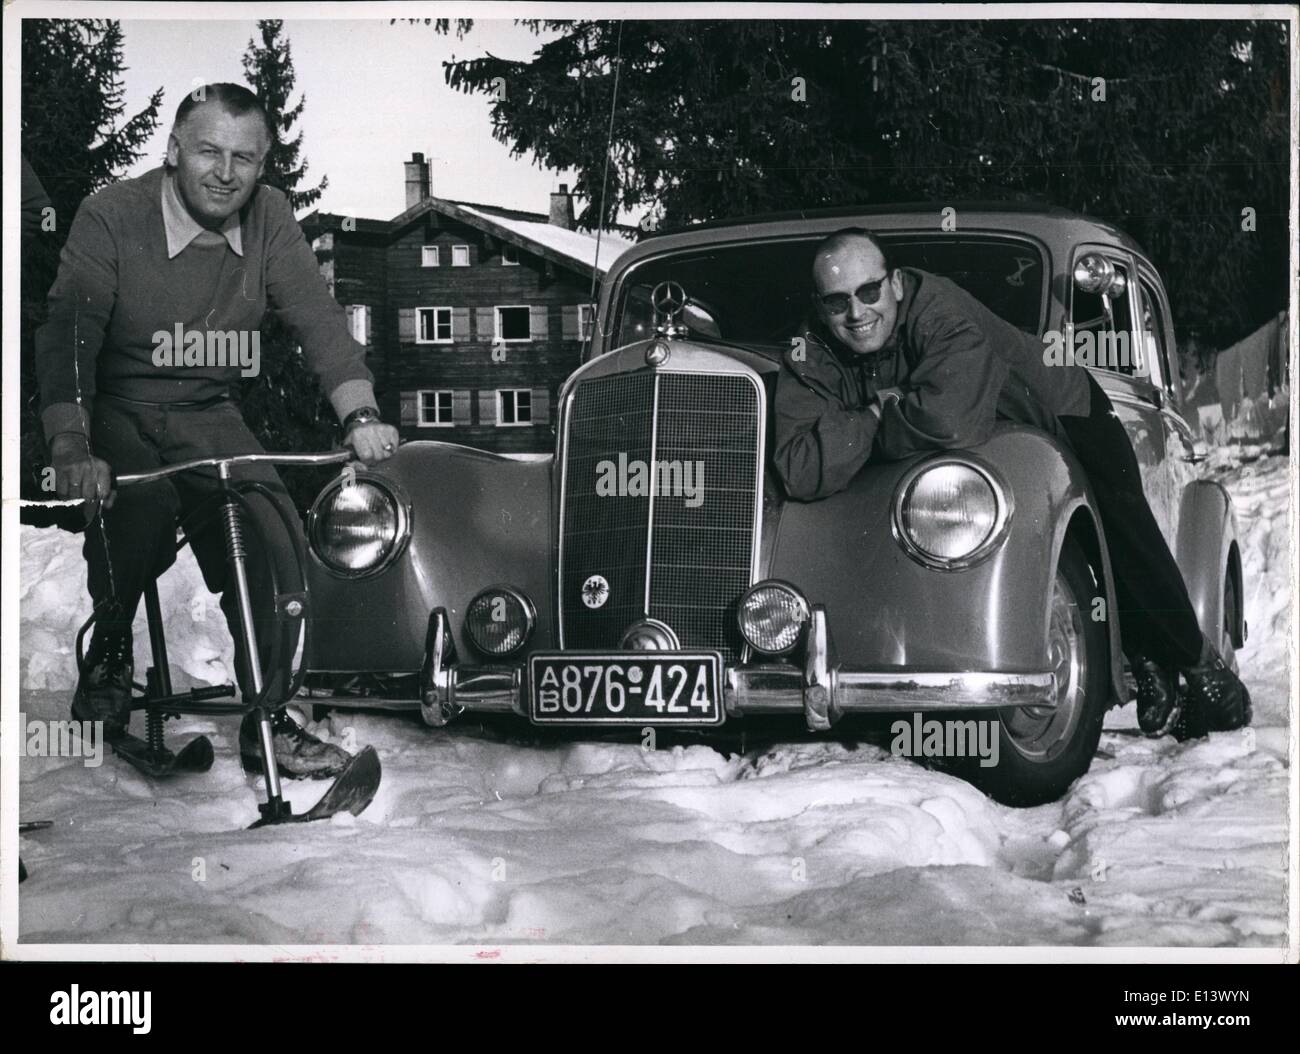 Mar. 27, 2012 - Karl Kling, Germany's sportsman Nr. 1. and Mercedes champion in Mexiko during his holidays in the Algau/South-West Germany. Karl Kling, this time on the steering wheel of a Skibob, and his companion in the most difficult motor - car race of the world in Mexiko, Klenk enjoy themselves after exerting racing - days in front of the Algau Berghof near Sonthofen/Algau. They like snow and sun in 1500 meters above sea - level. Stock Photo